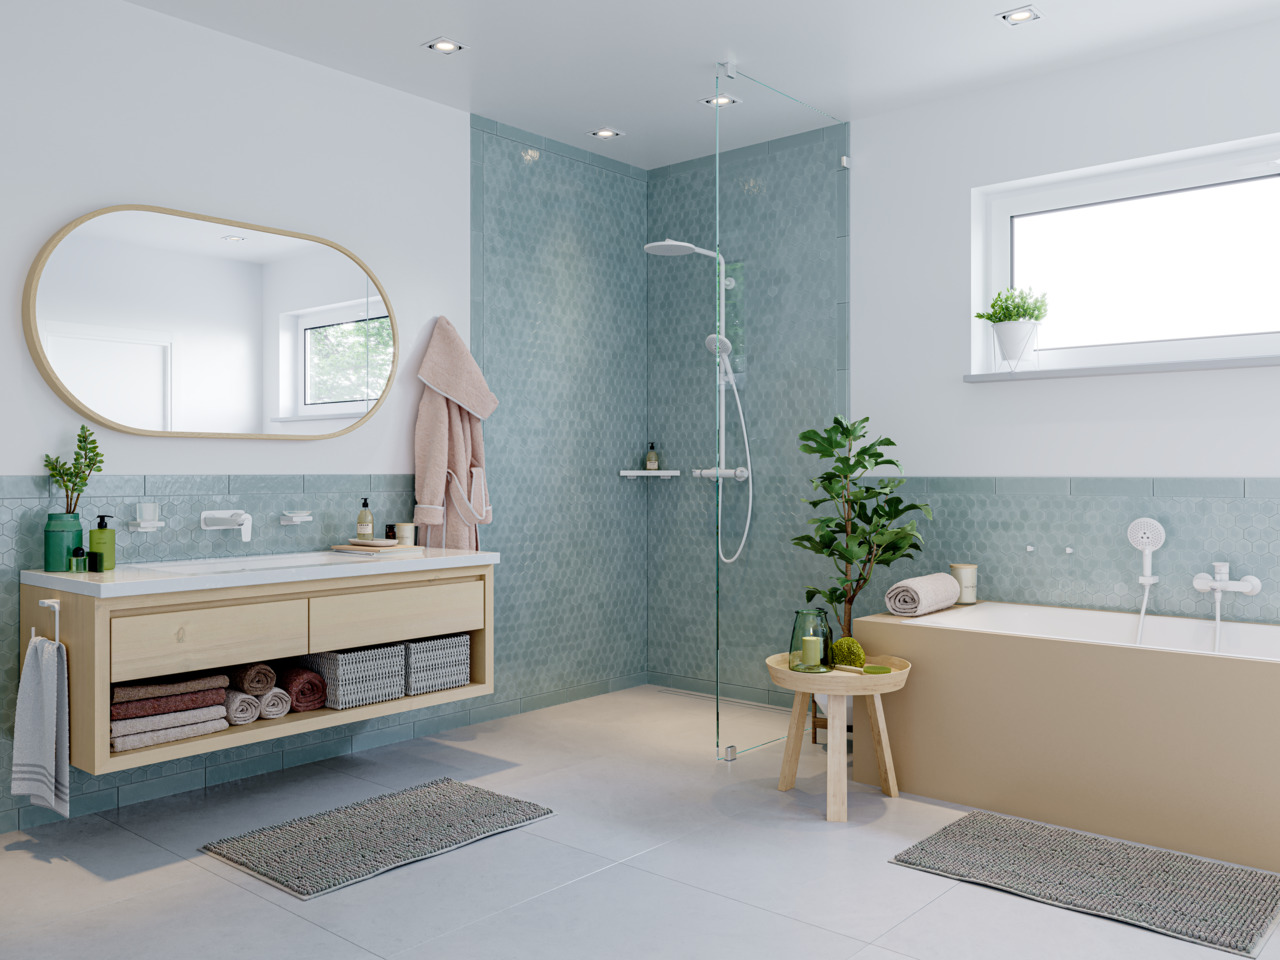 Five ways to build your bath space with trends, comfort & emotion factors